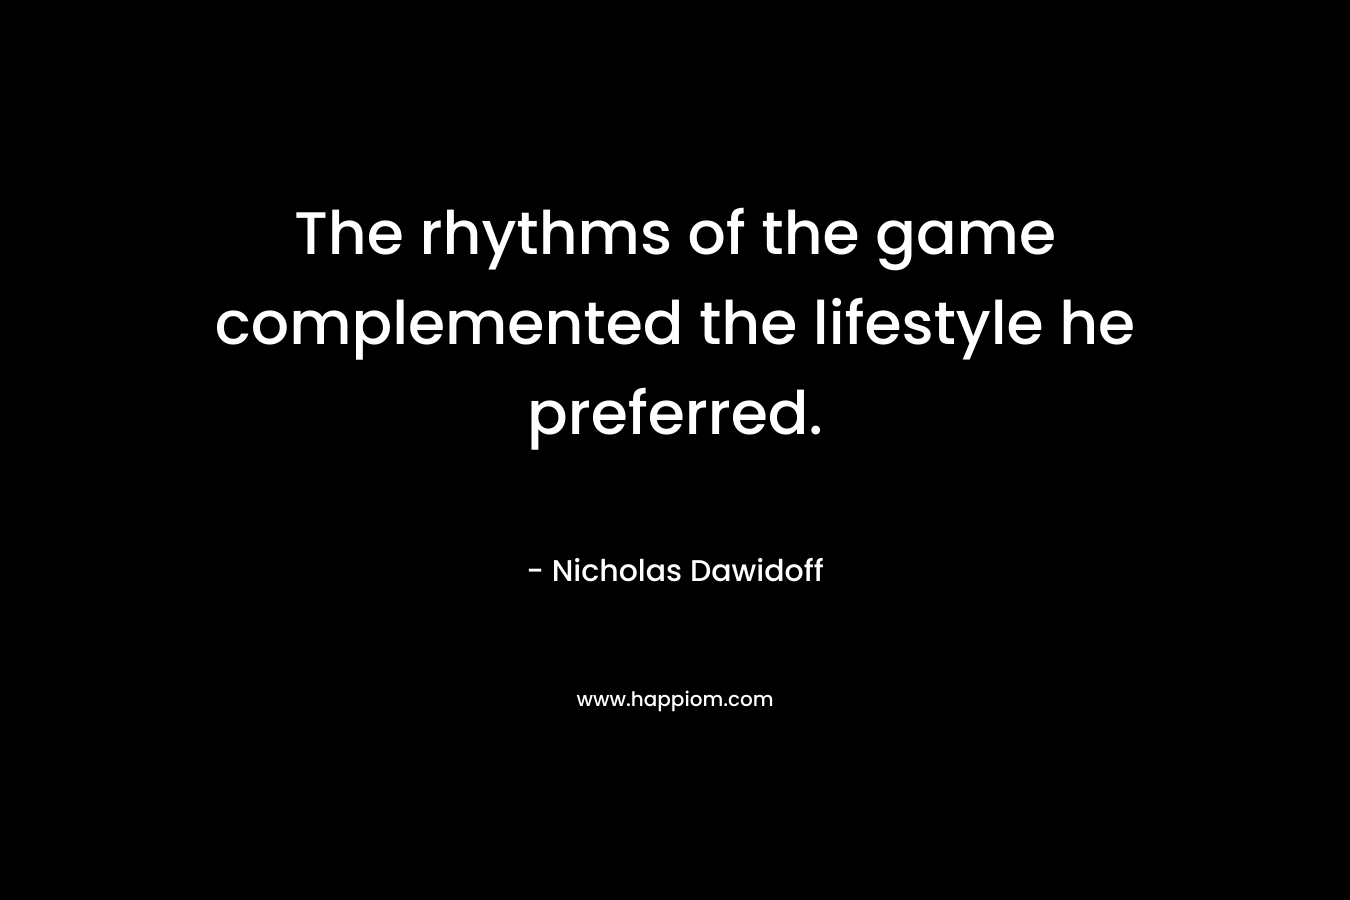 The rhythms of the game complemented the lifestyle he preferred. – Nicholas Dawidoff